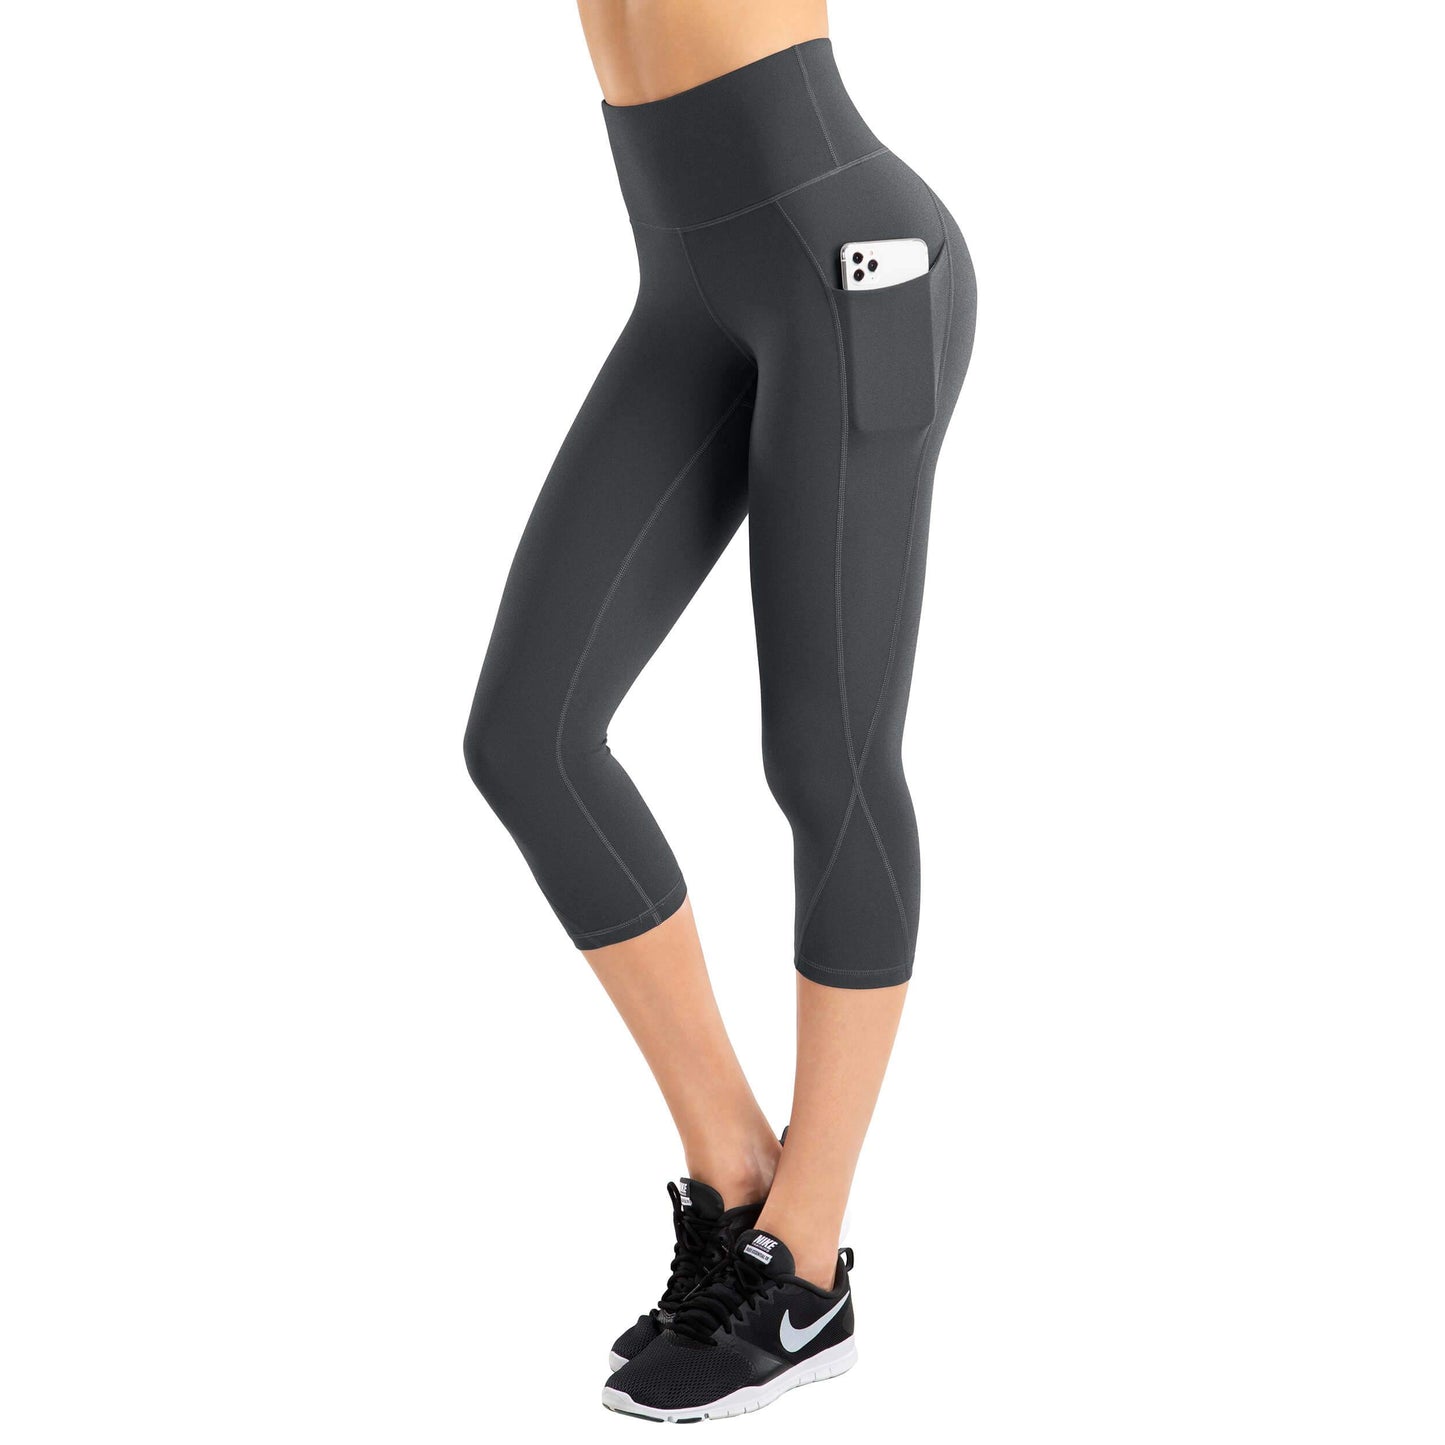 iKeep<sup>&reg;</sup> Next Level Excise Yoga Capris with pockets